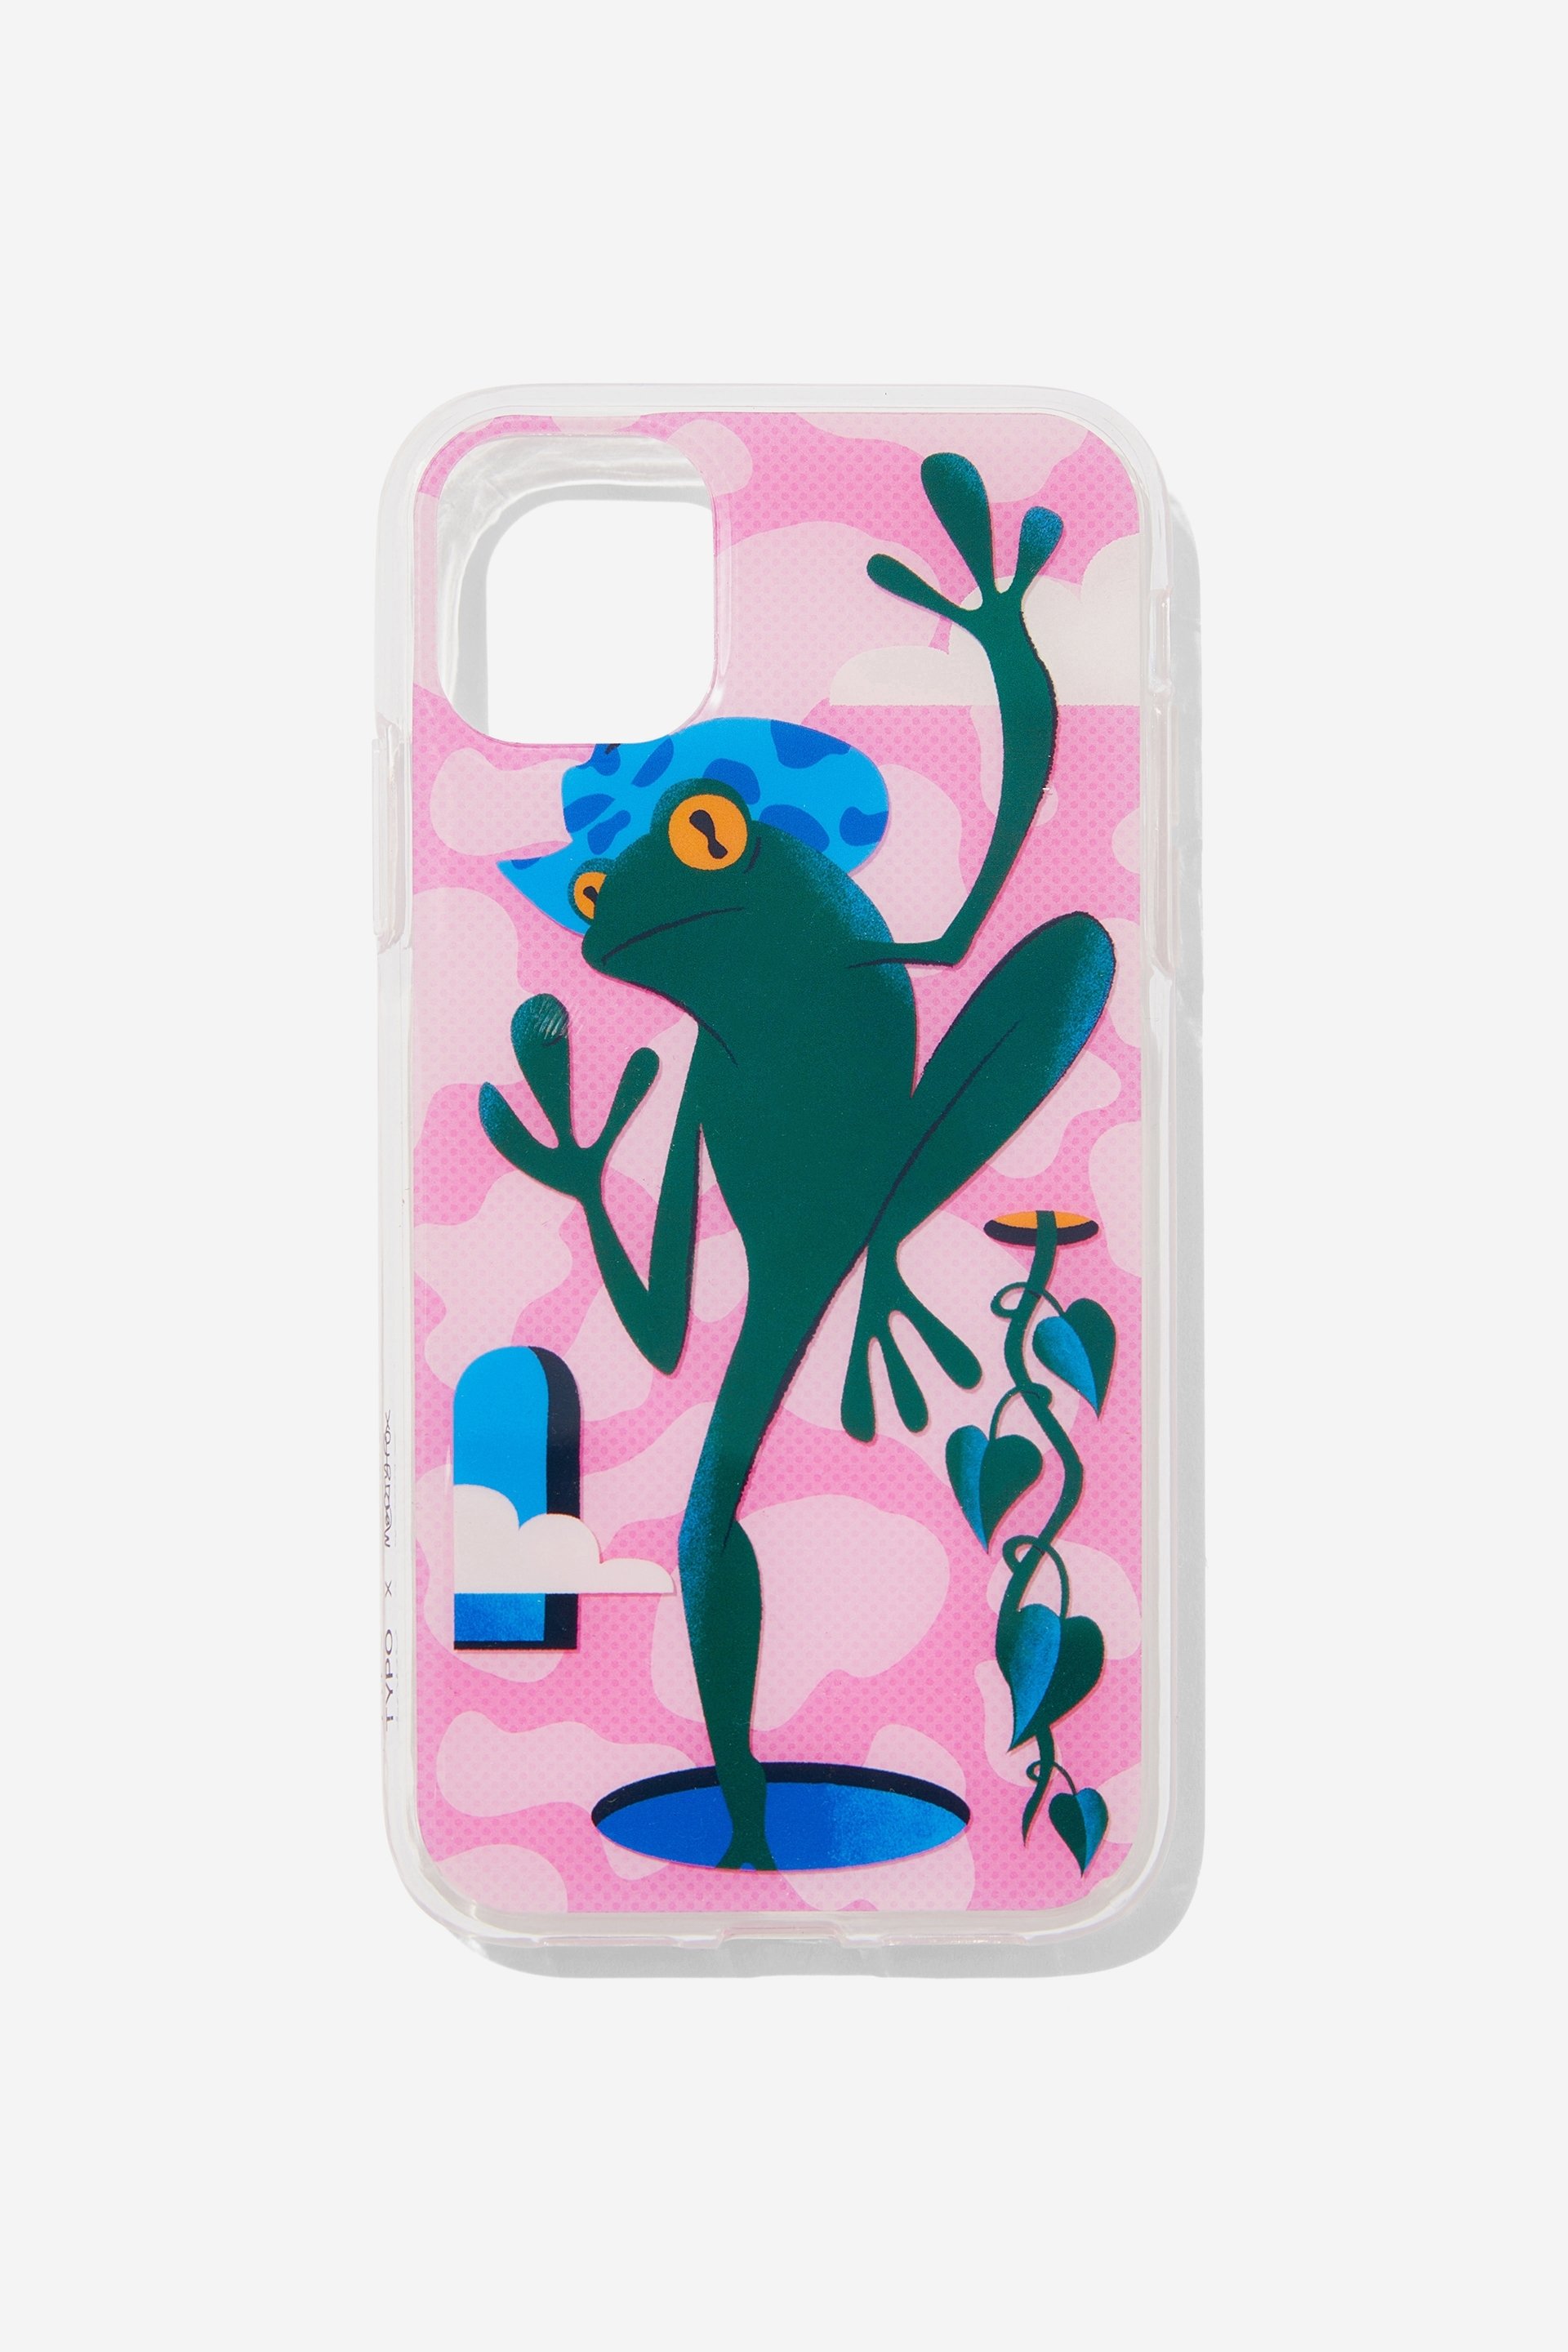 Typo - Graphic Phone Case Iphone 11 - Txm frog in a hat